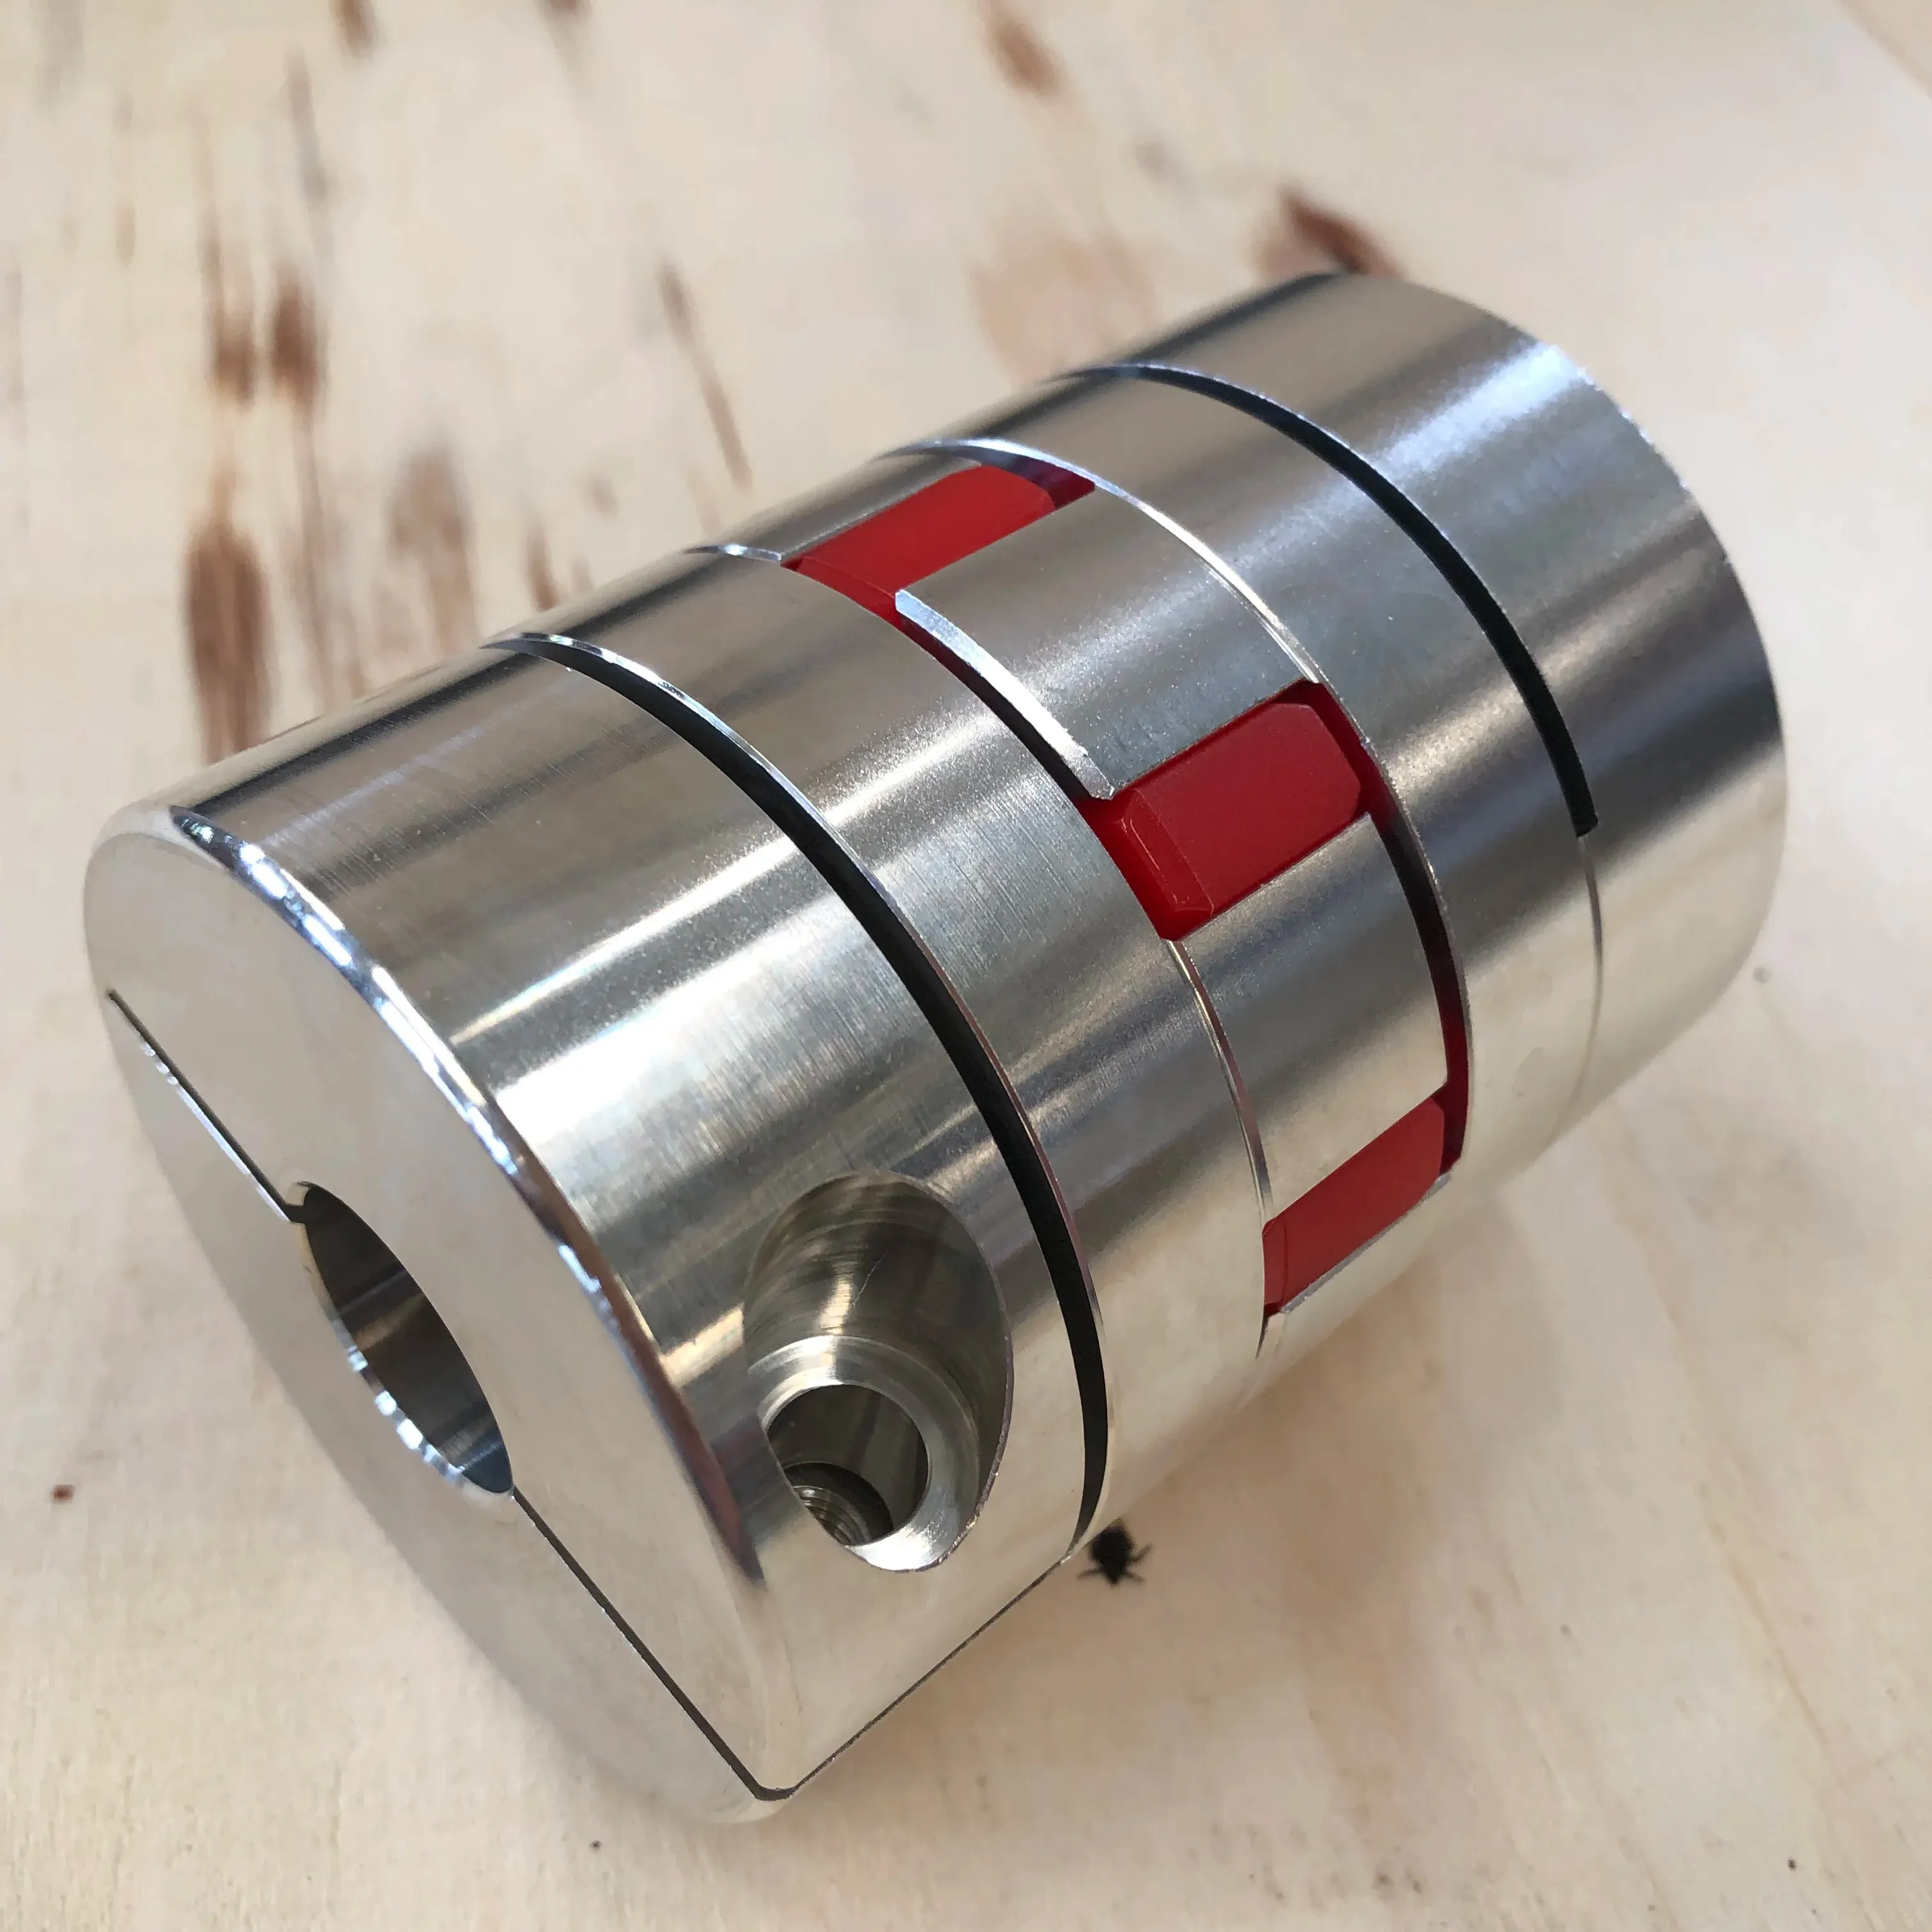 Aluminum Economical Polished Flexible JM Jaw Spider Coupling Shaft Plum Couplings Easy To Install Flexible Jaw Couplings